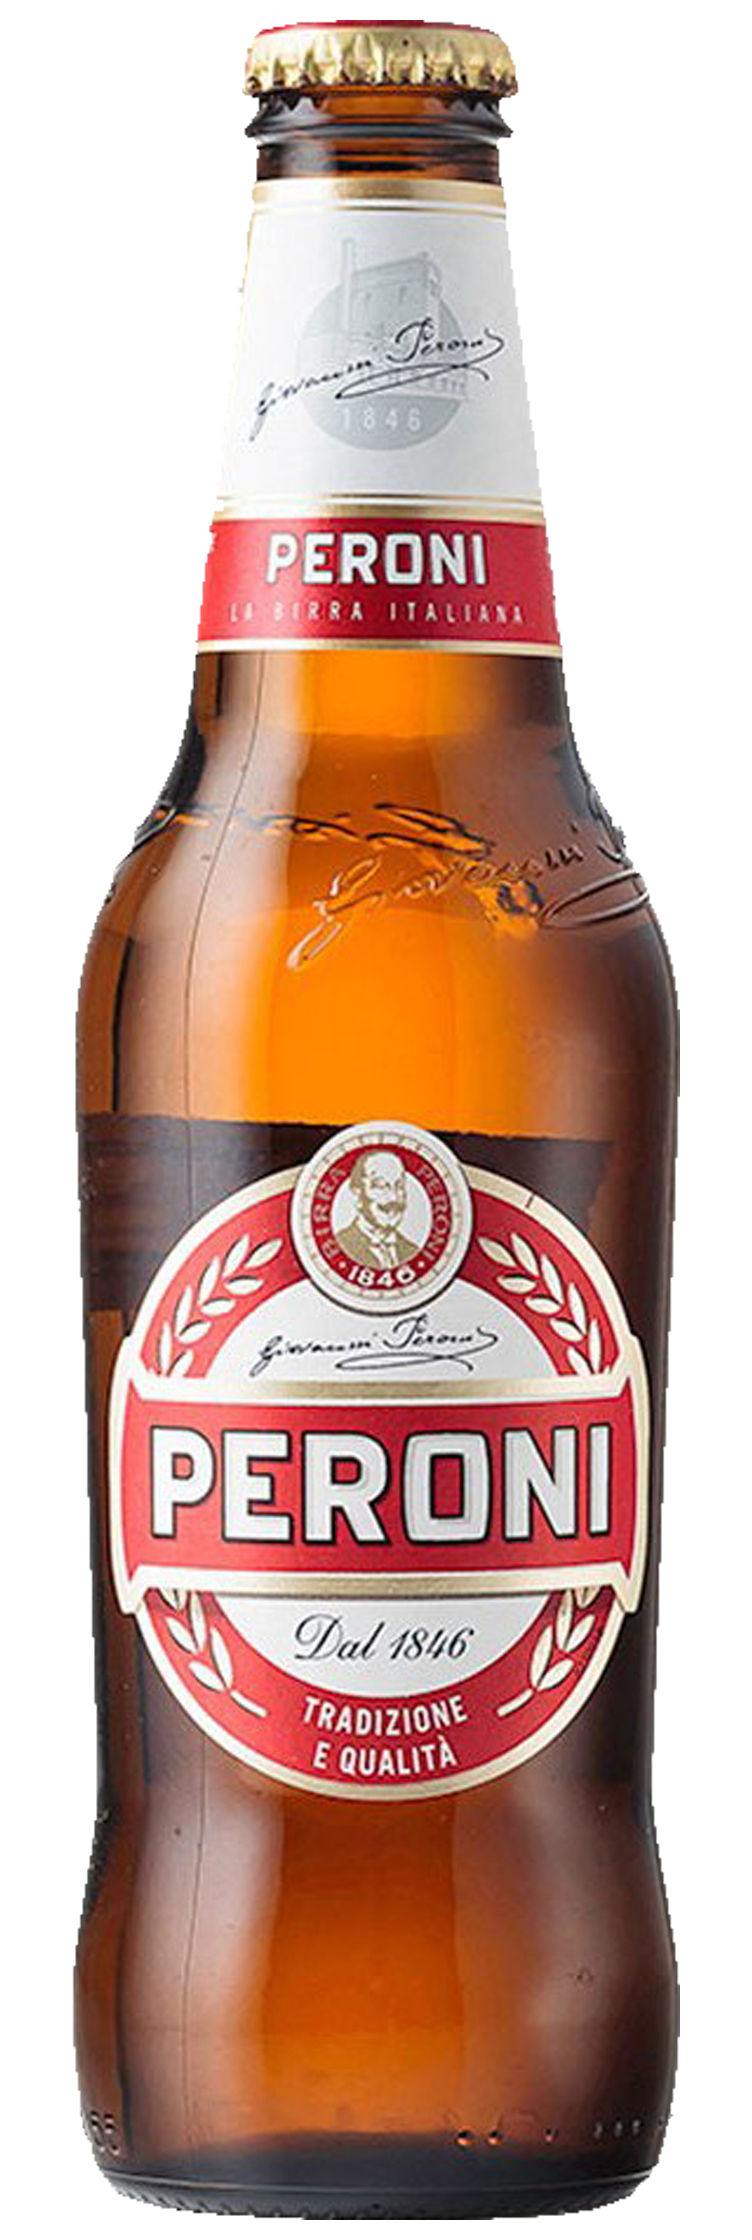 Peroni Red Label Lager 24 x 330ml Beers